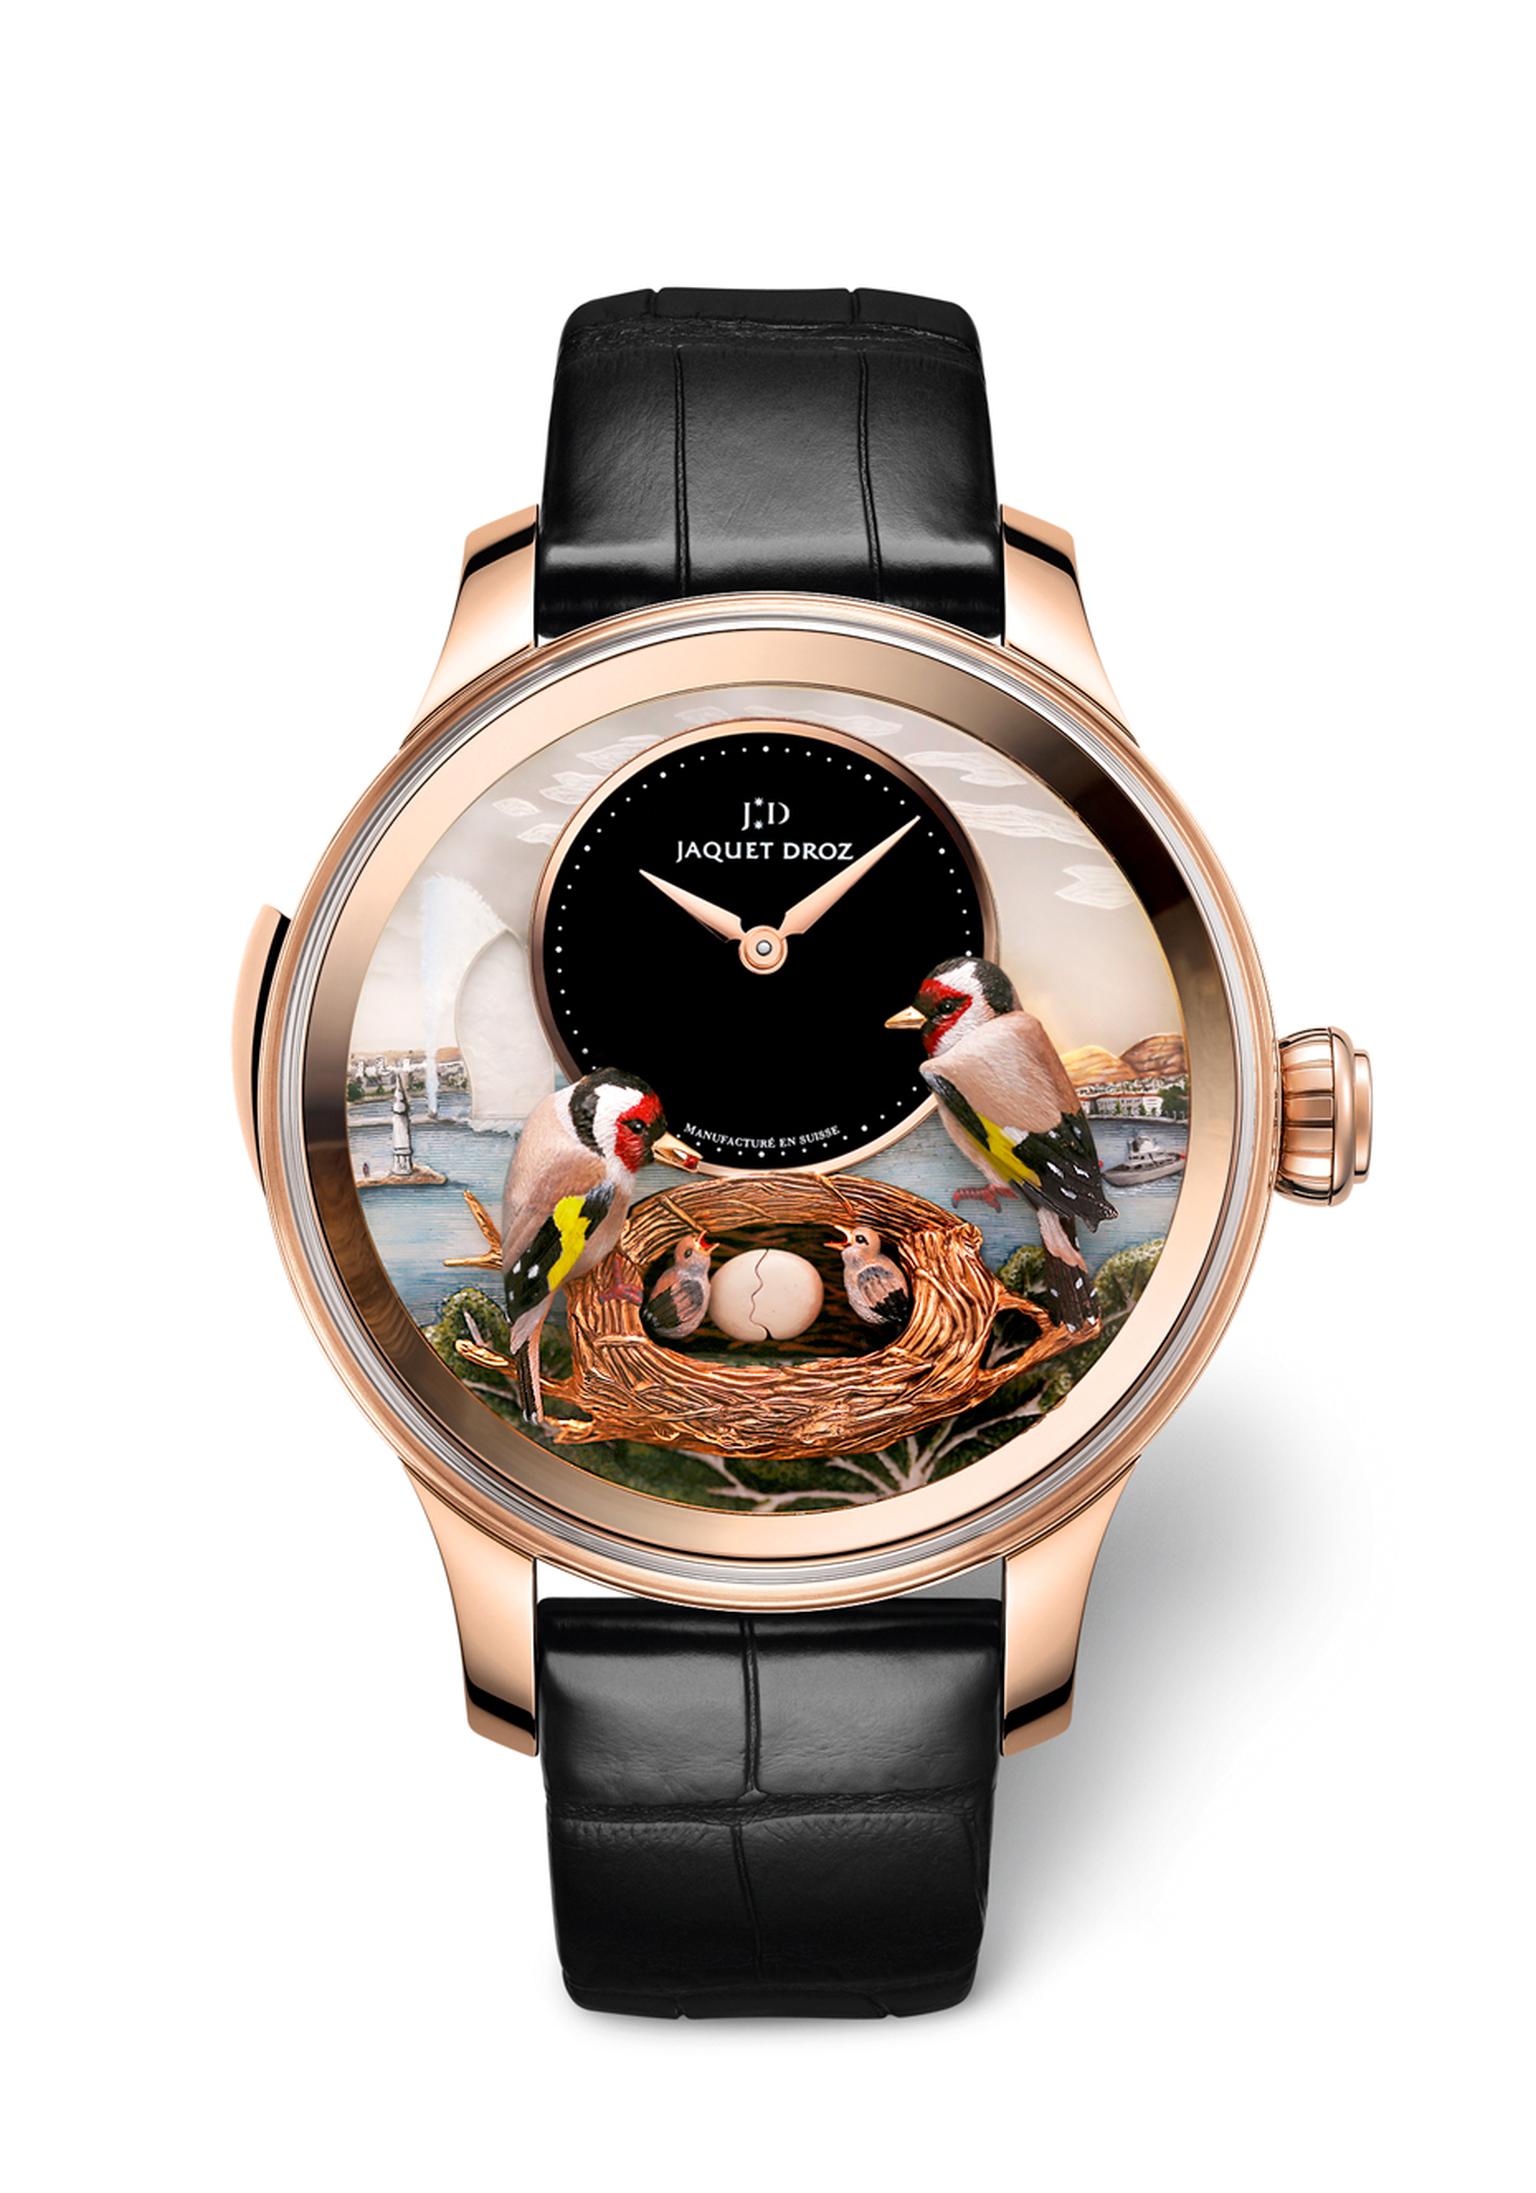 At the beginning of 2015, Jaquet Droz has launched the new Bird Repeater Geneva. An automaton watch with a minute repeater, the technical complexity of this piece is on a par with the artistry involved in the dial.